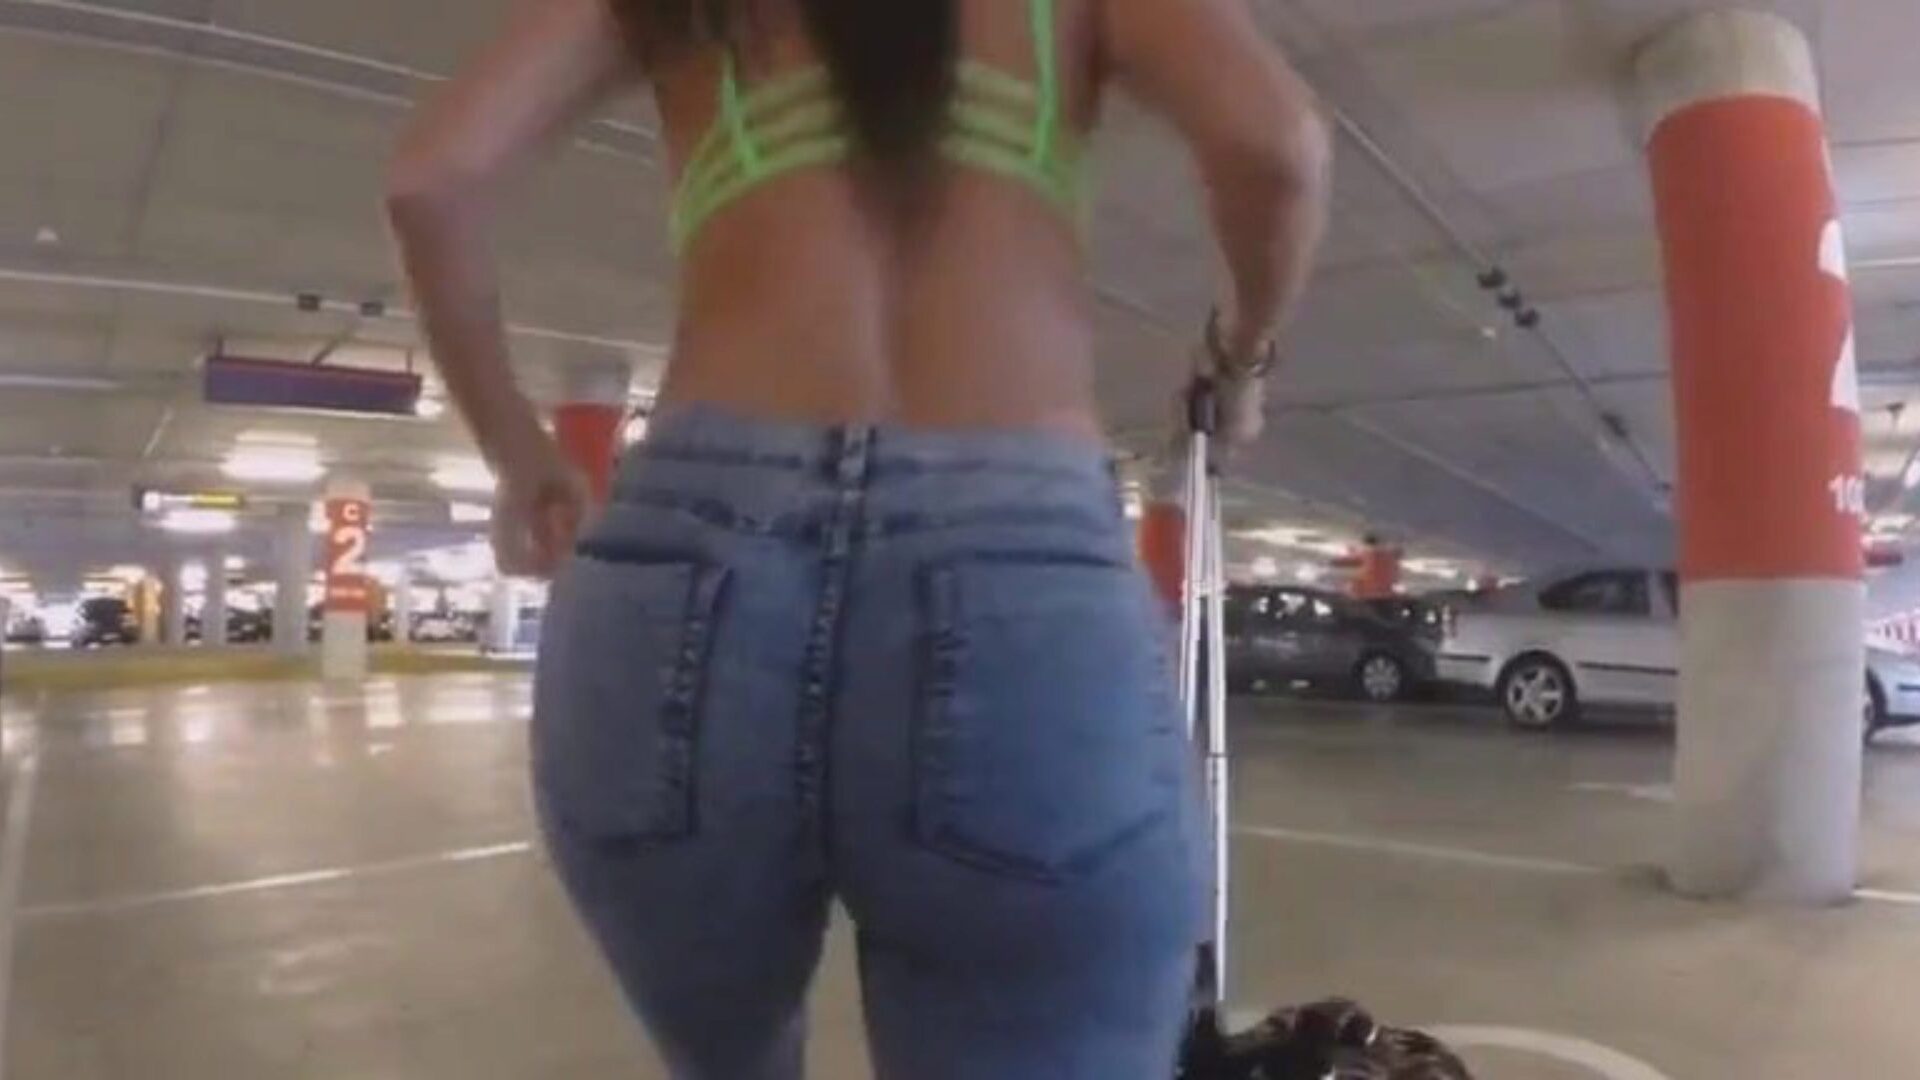 Franceskas perfect wet booty got stuffed in a parking pile We are at the airport and we have Franceska Jaimes with us.We enjoy Franceska coz that honey has that large ideal a-hole and that playgirl is always ready to take wang.Shes in the airport parking bunch and taking raw 10-Pounder and getting slammed in the gazoo